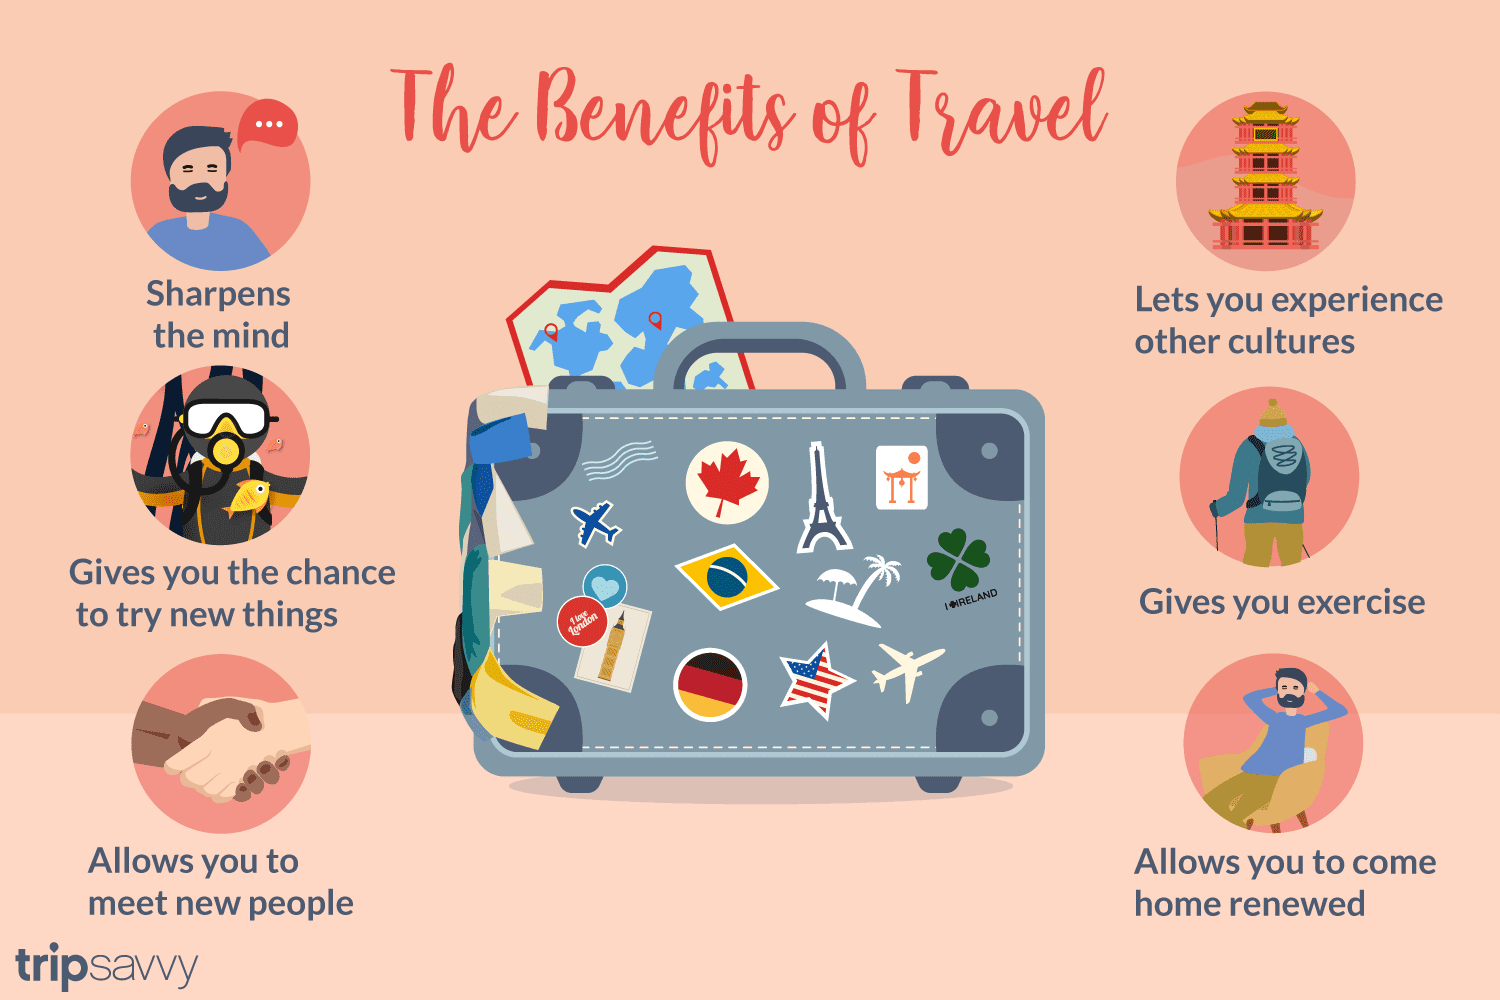 The Benefits of Travel